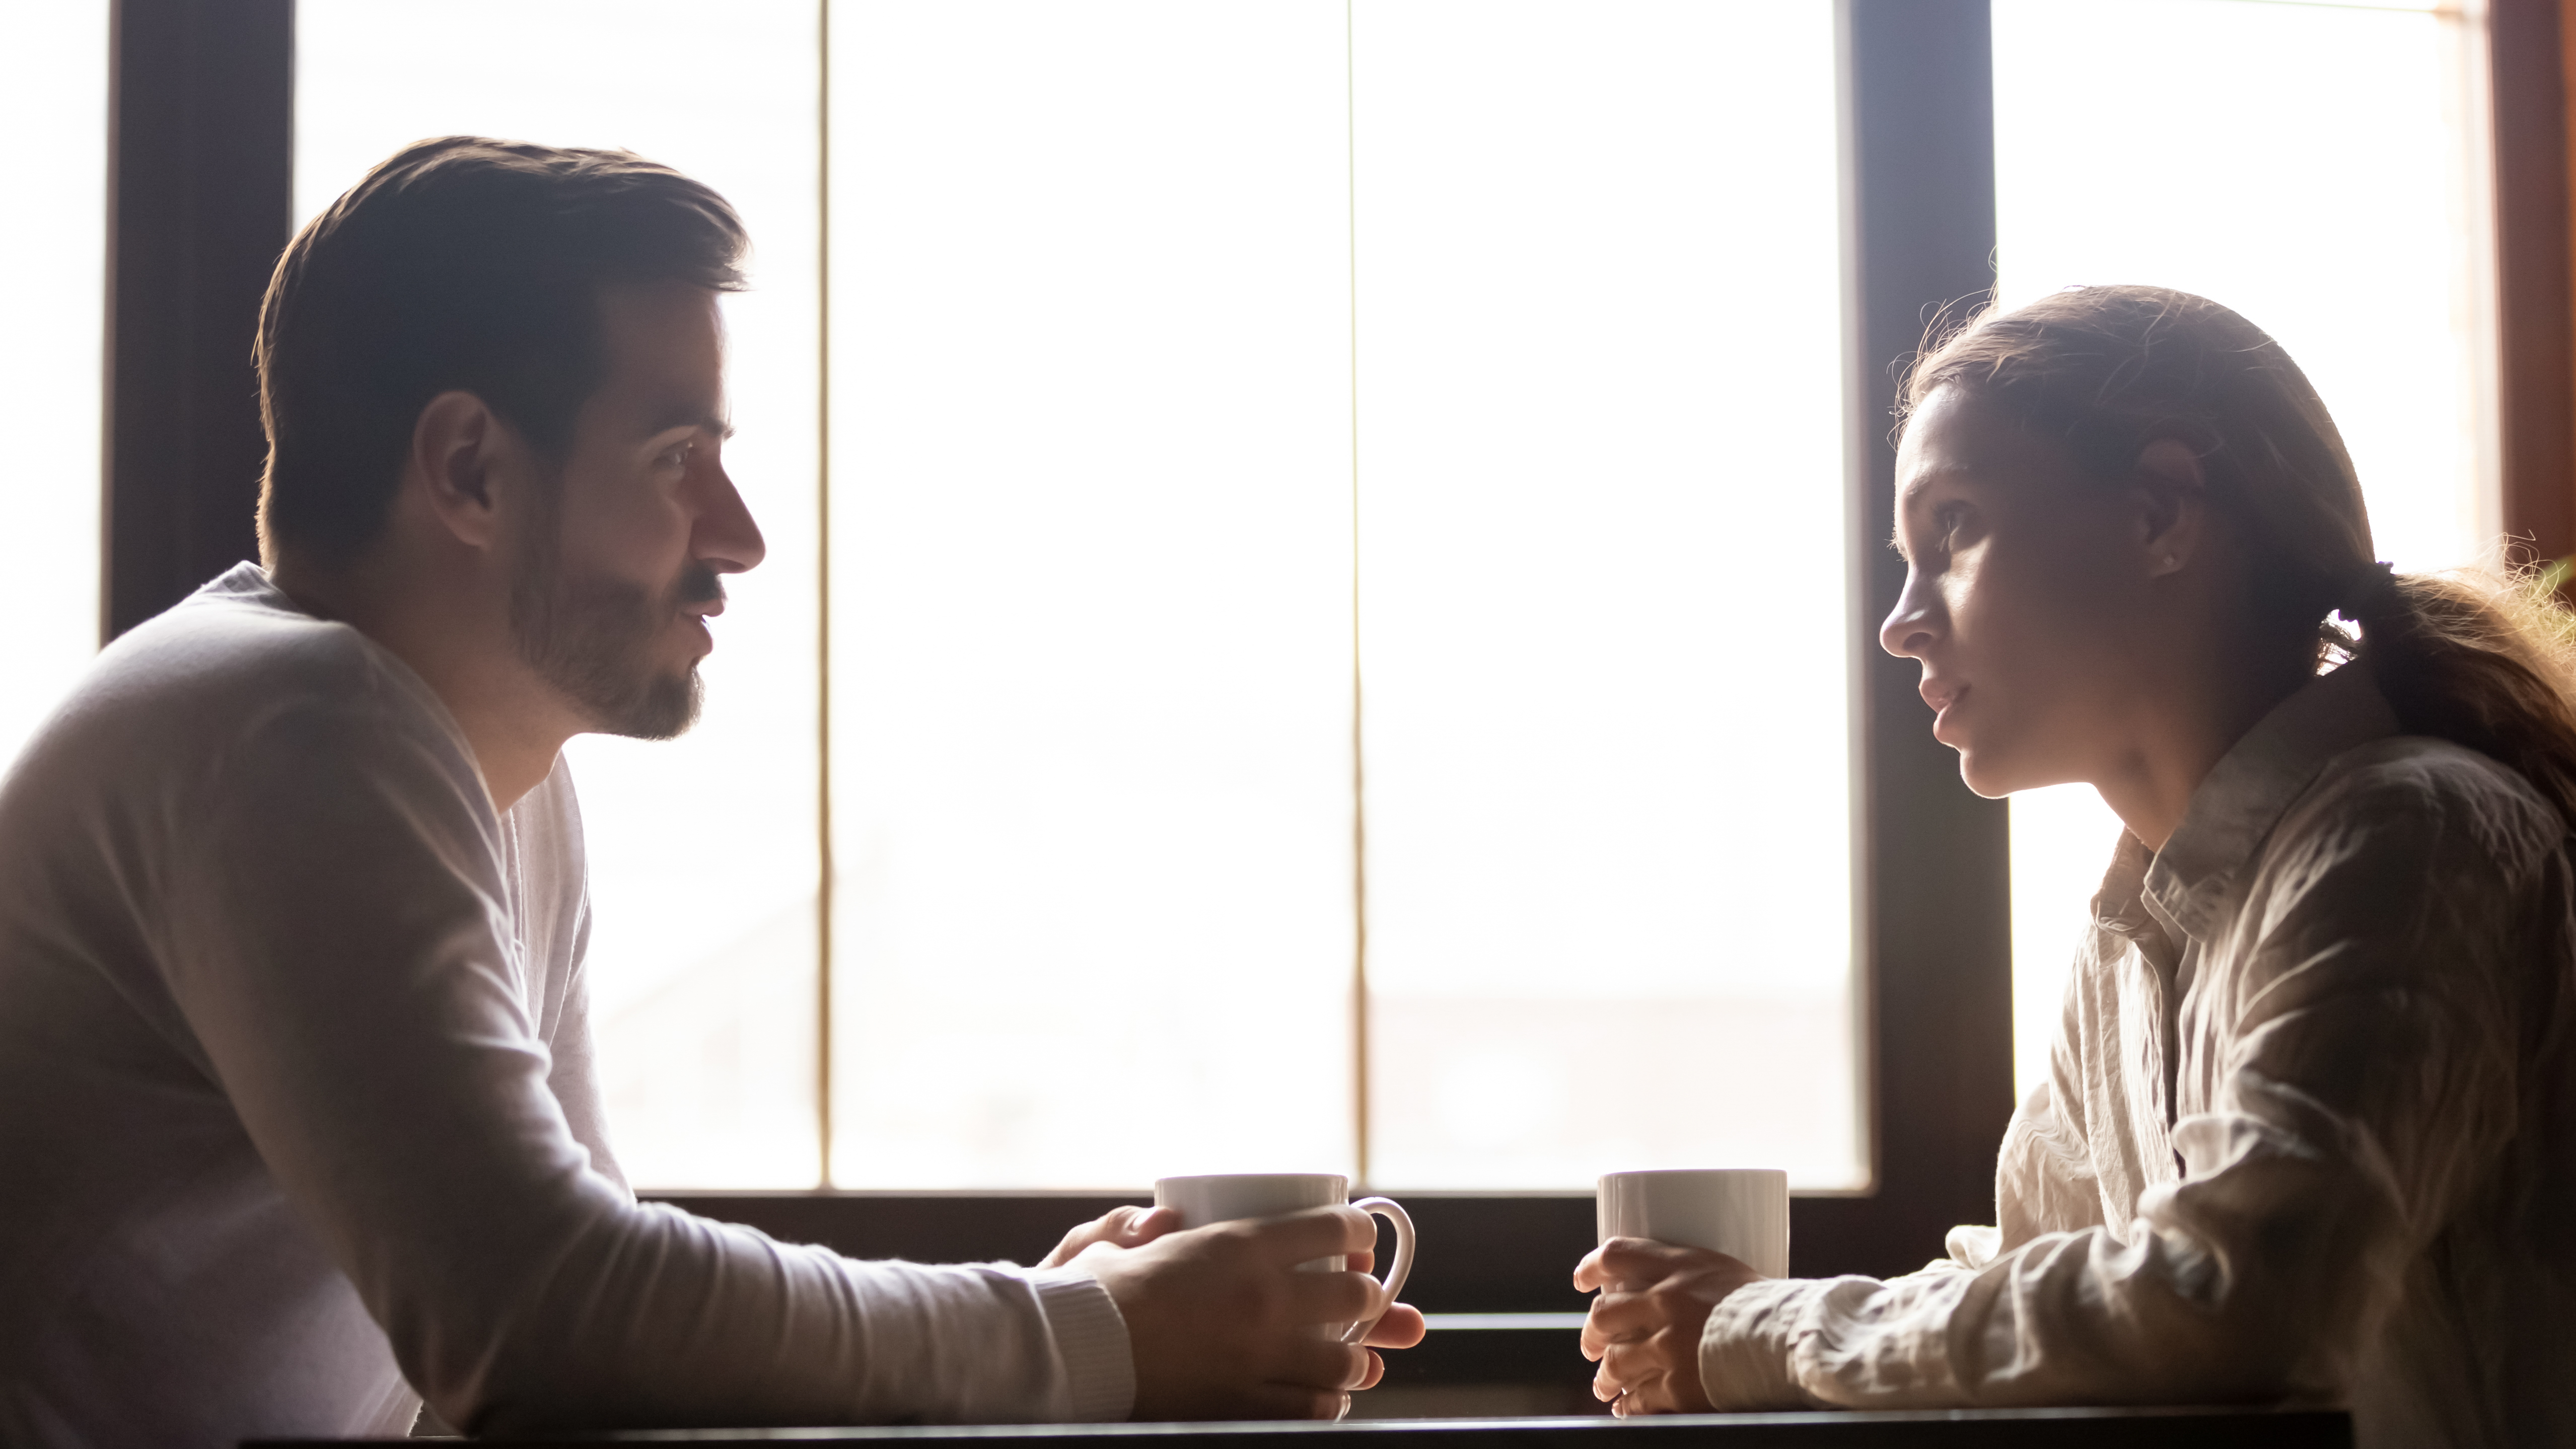 A couple talking while having coffee | Source: Shutterstock